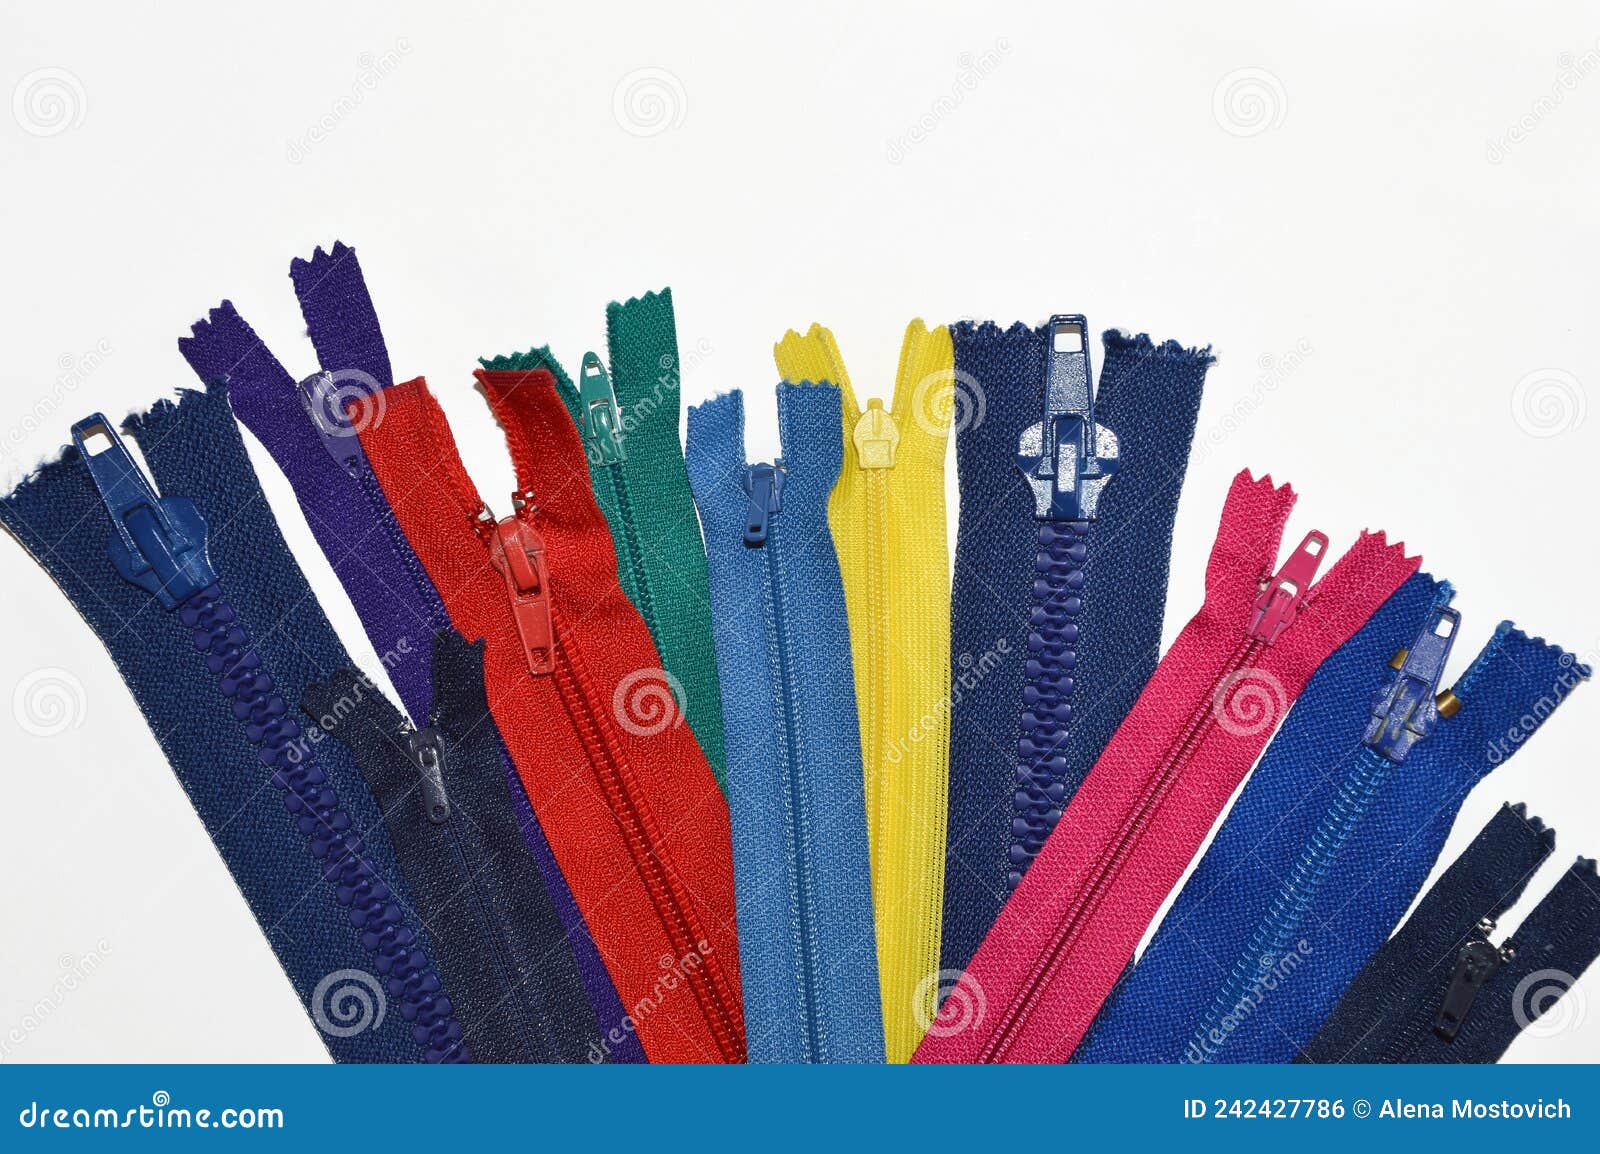 Zippers for Clothes, Different Colors. Material for Sewing and ...